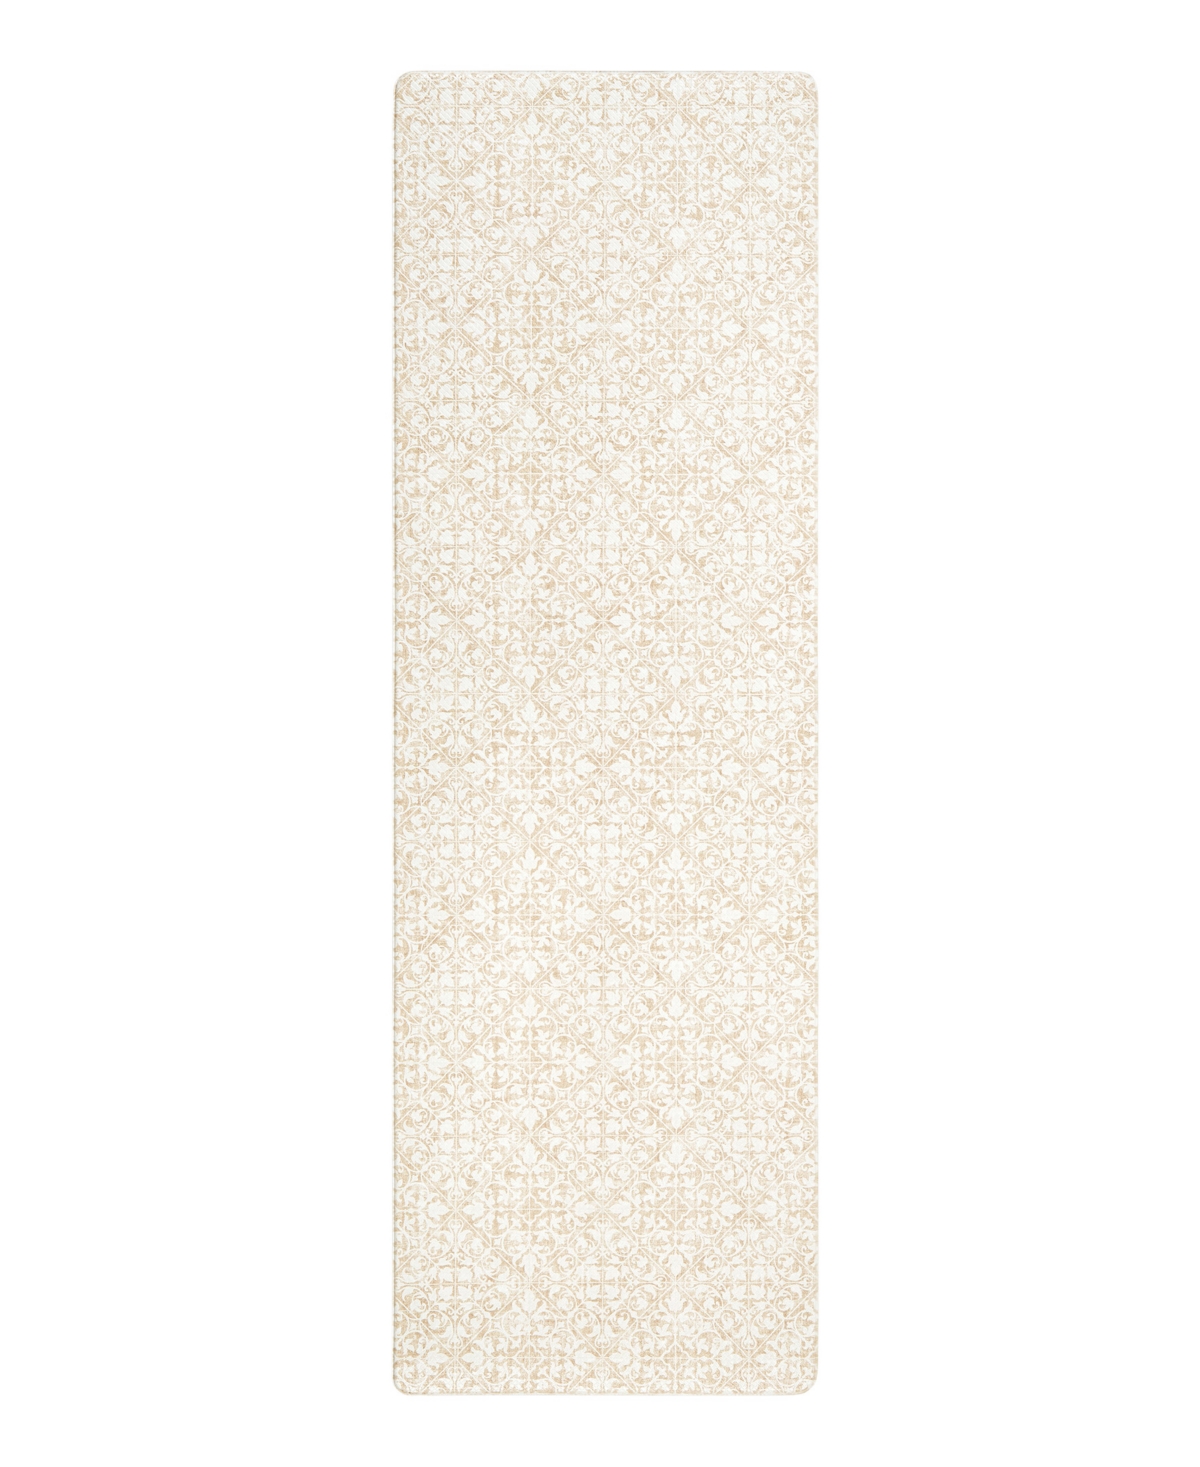 Town & Country Living Basics Comfort Plus Kitchen Mat 26782 1'6" X 4'7" Runner Area Rug In Beige